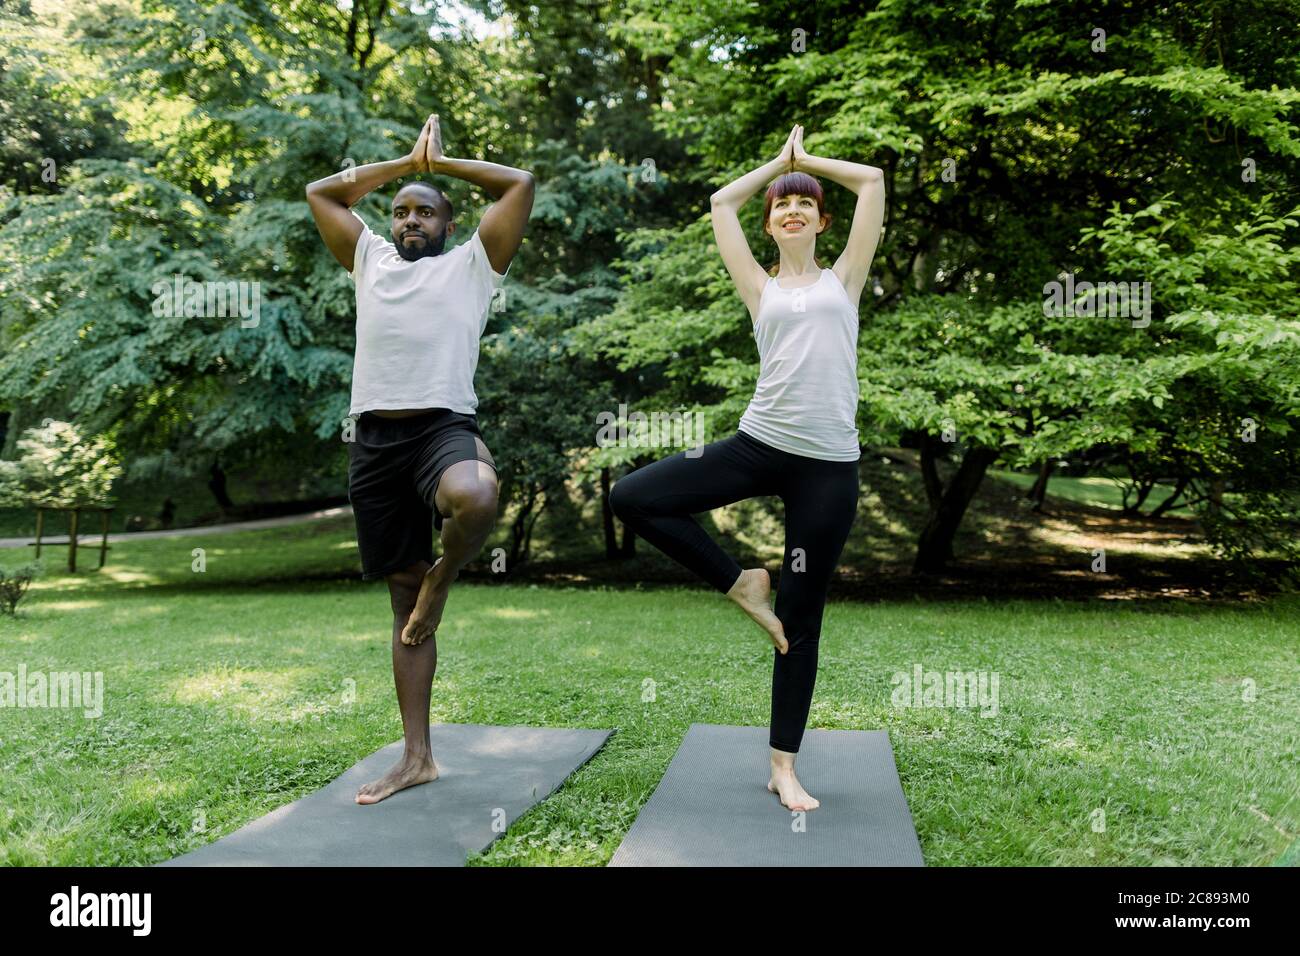 Couple doing yoga in nature. Full length view of young multiethnical male and female friends doing the tree yoga pose together at a park Stock Photo